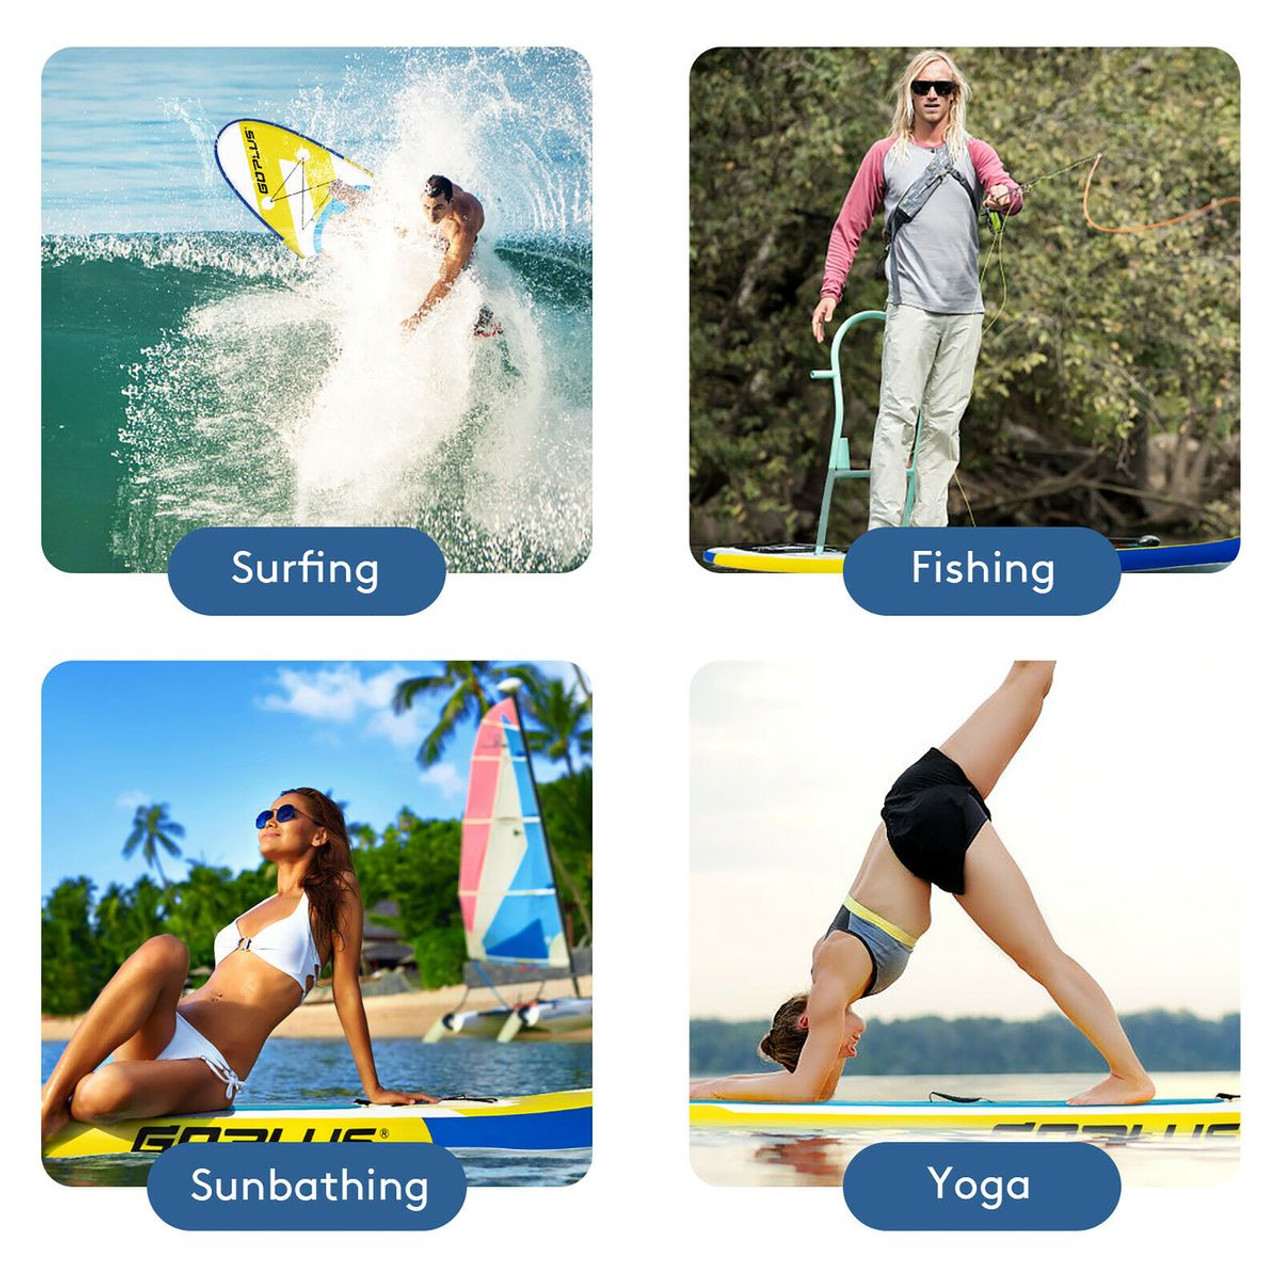 10-Foot Inflatable Stand-up Paddle Board with Accessories product image